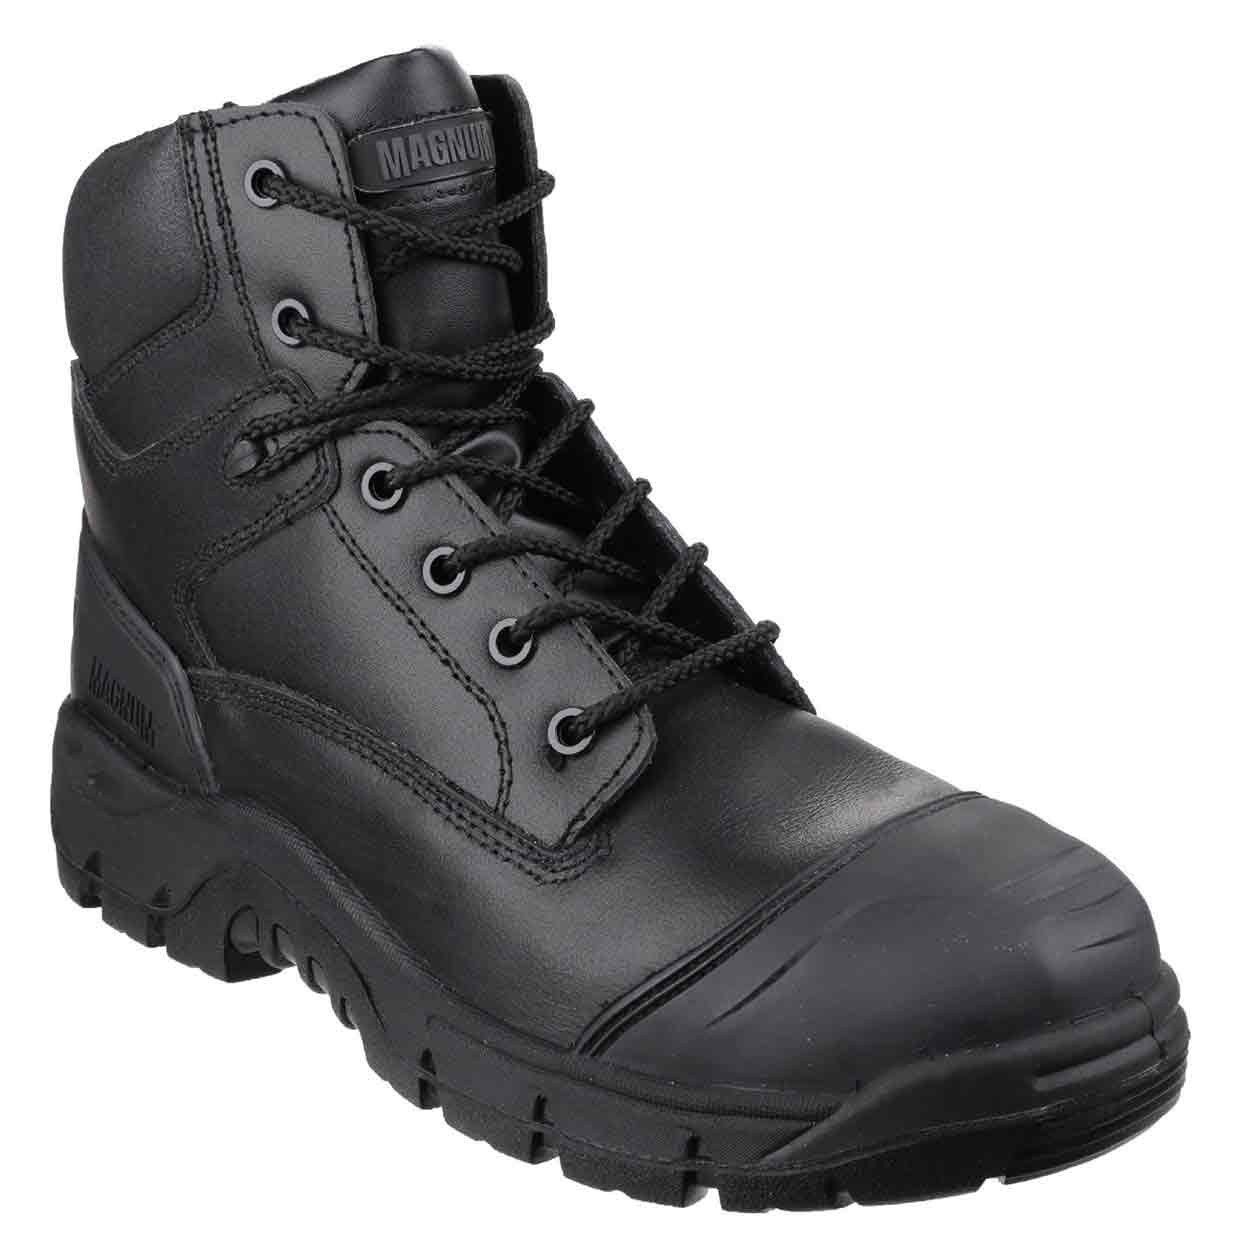 Magnum Metal-free Roadmaster Safety Boot - Composite and Metal Free Safety  Footwear - Mens Safety Boots & Shoes - Safety Footwear - Best Workwear